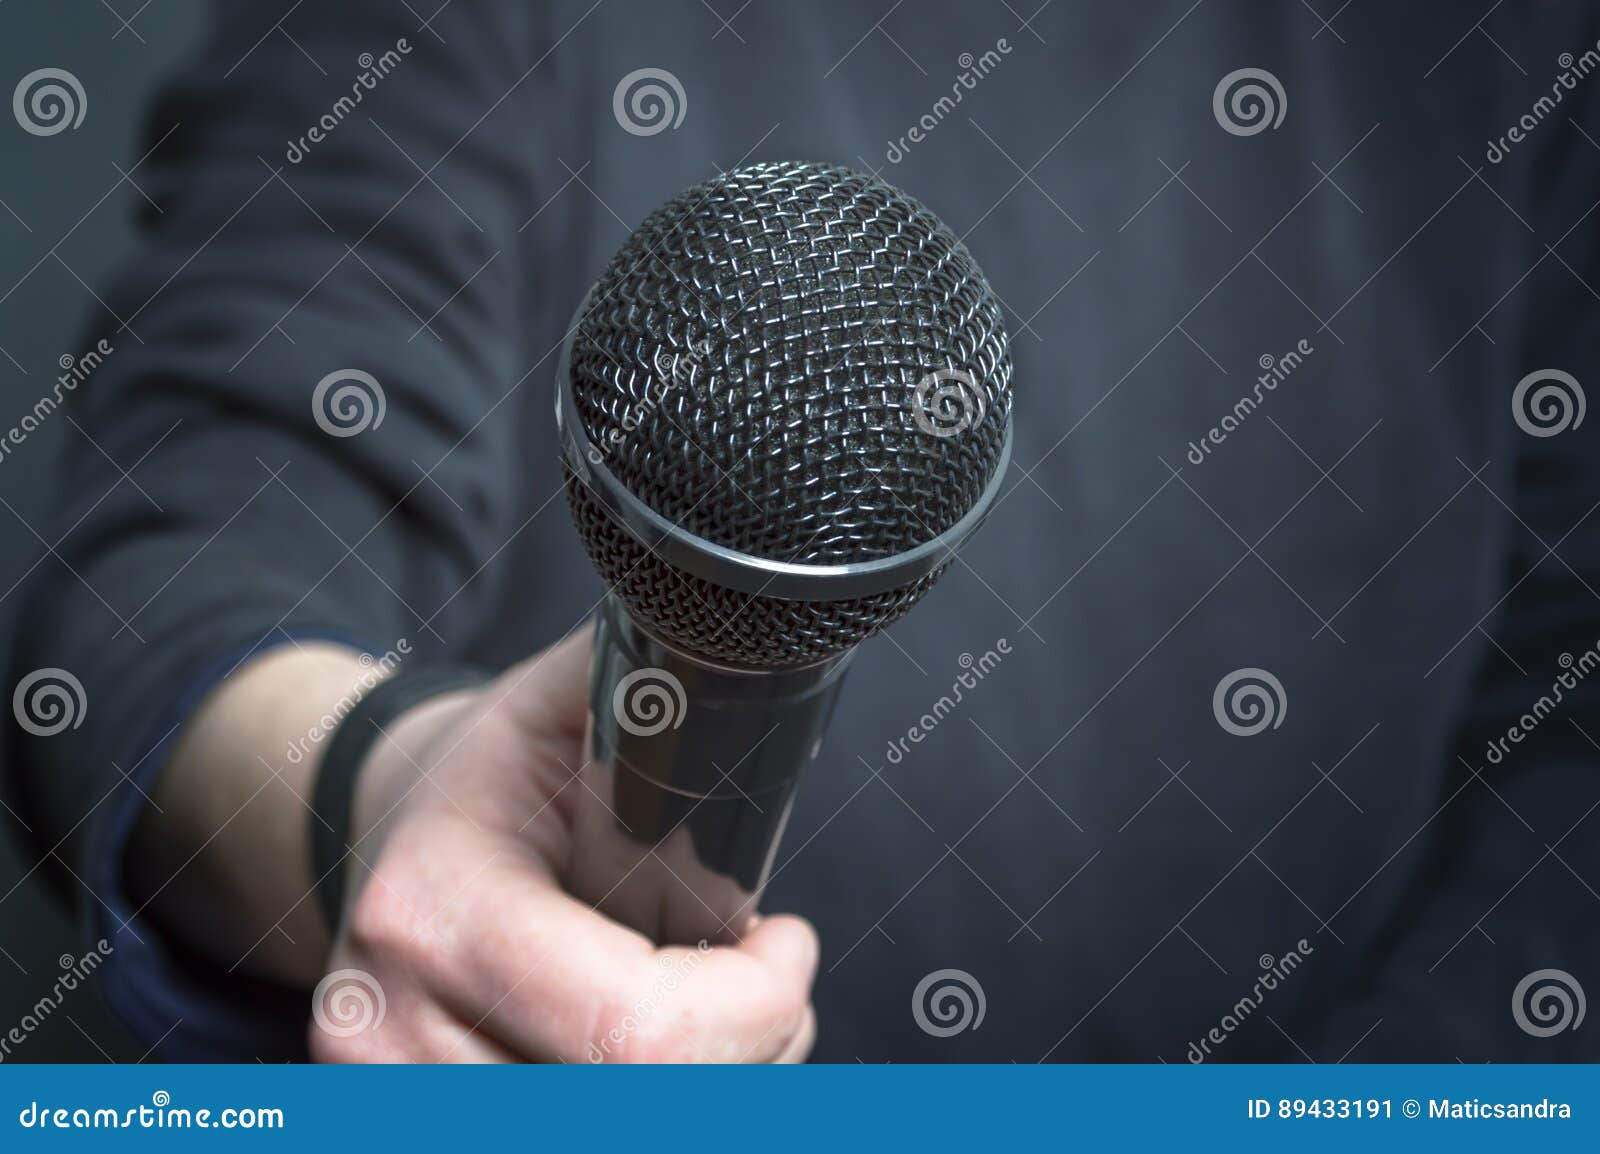 journalist making speech with microphone and hand gesturing concept for interview.